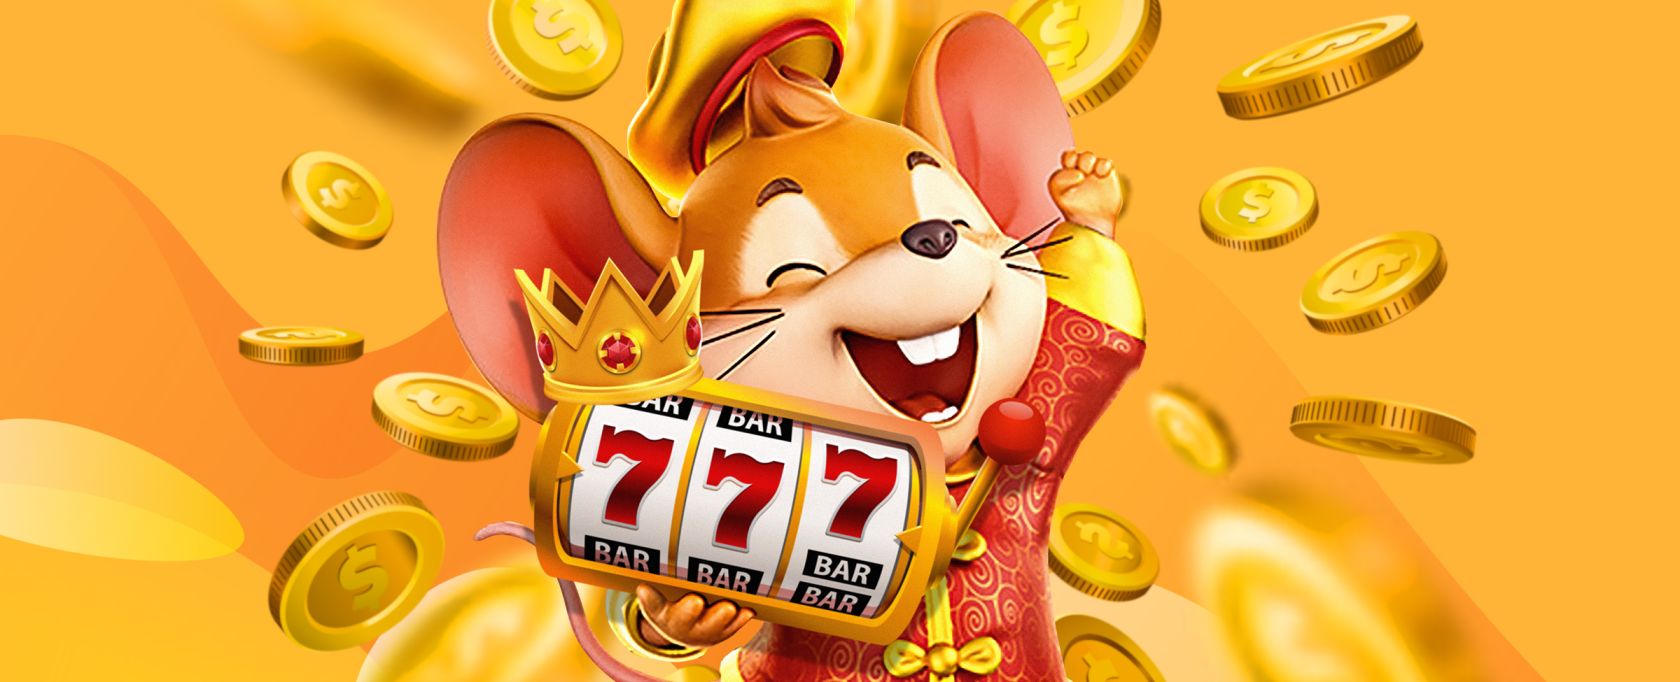 Try jackpot slots to potentially give you a giant payday!